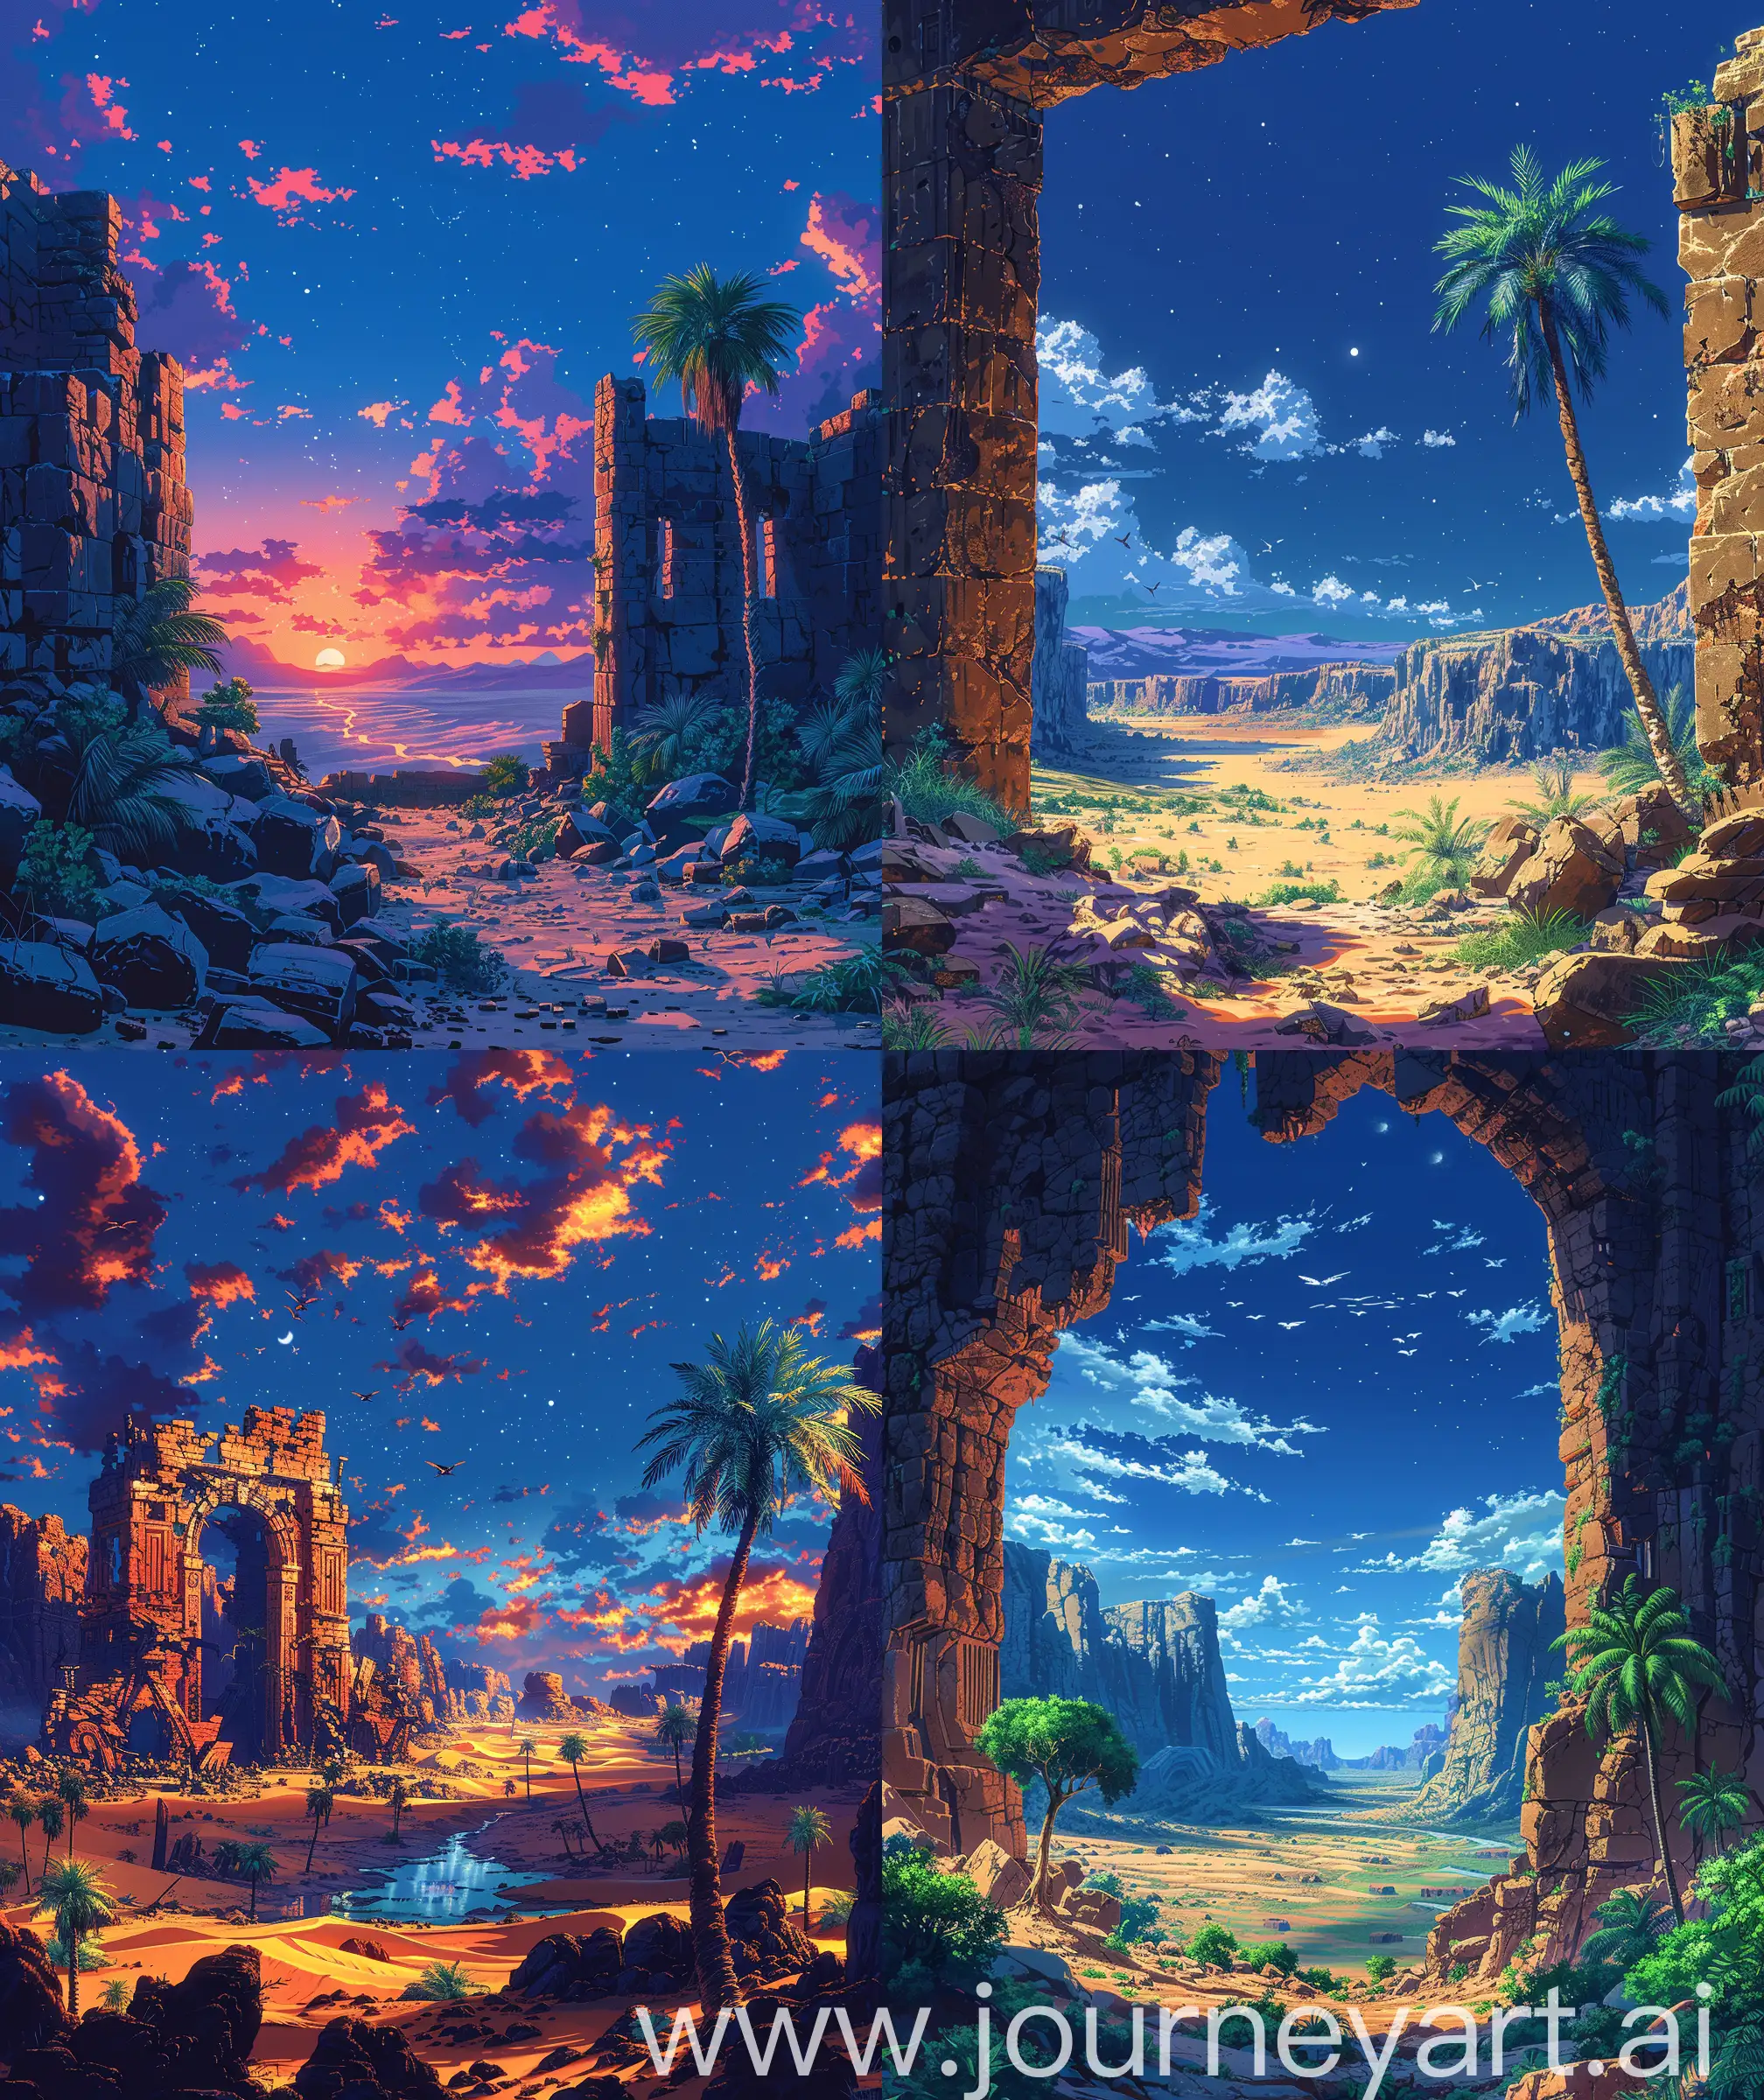 Beautiful anime scenery, mokoto shinkai style, desert oasis view, evening and night upcomming time view, abandon ruin structure in middle of desert, beautiful oasis, palm tree, beautiful anime scenery, illustration, ultra hd, High quality, sharp details, --ar 27:32 --s 600